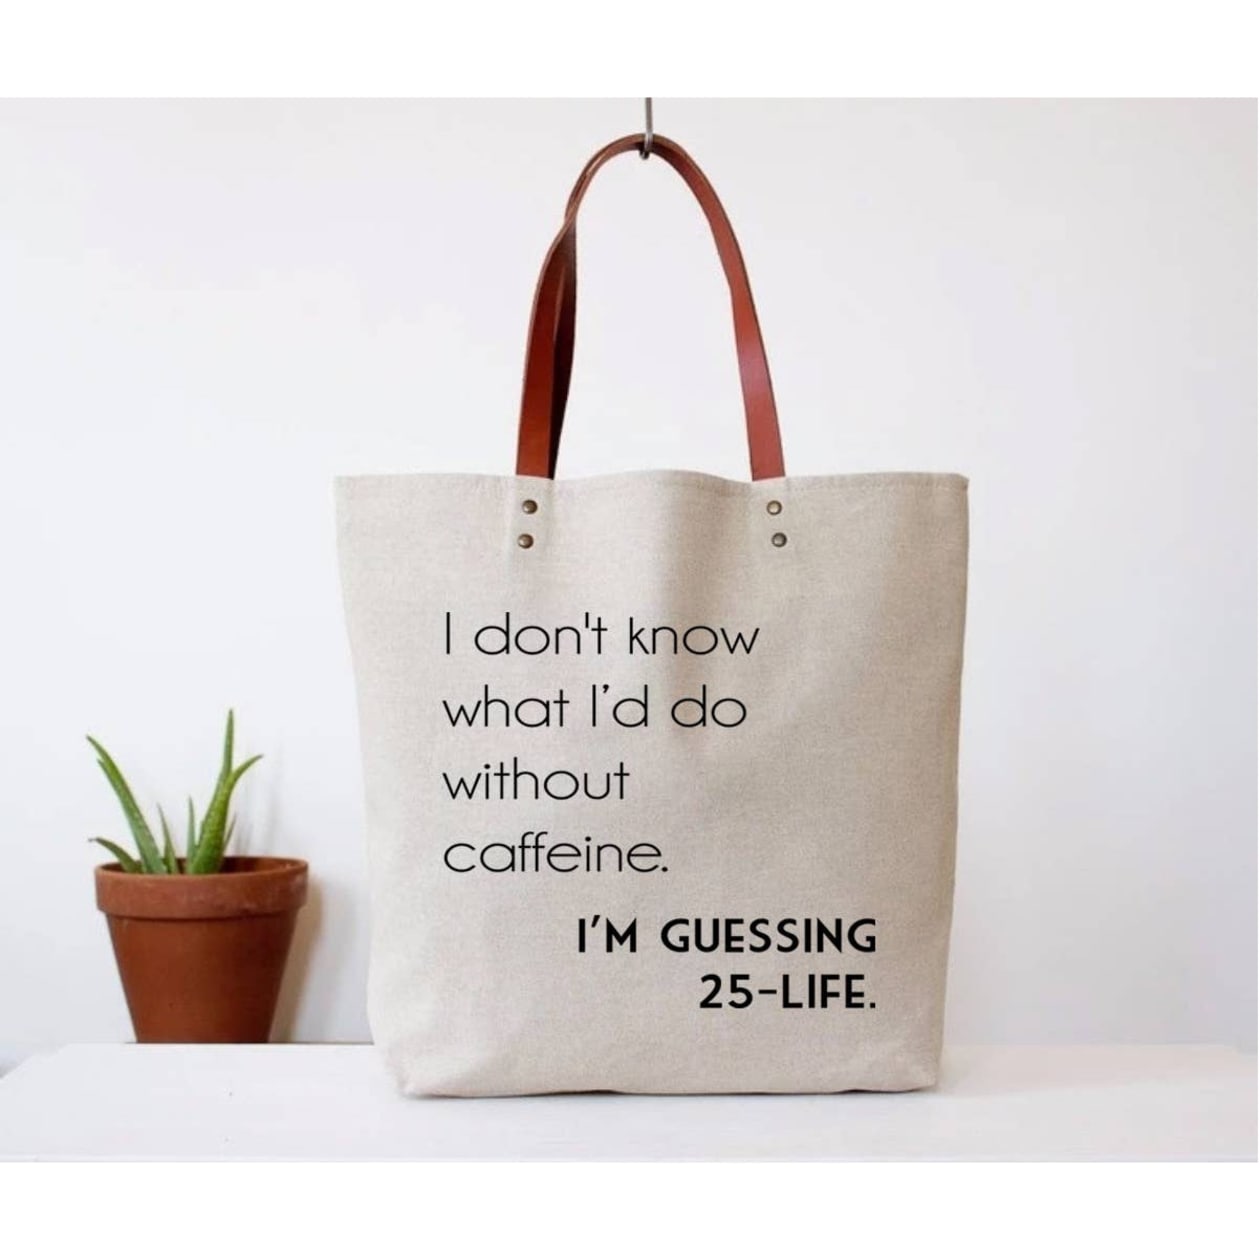 Fun Club I Don't Know What I'd Do Without Caffeine Canvas Tote Bag | Vegan Leather Handles